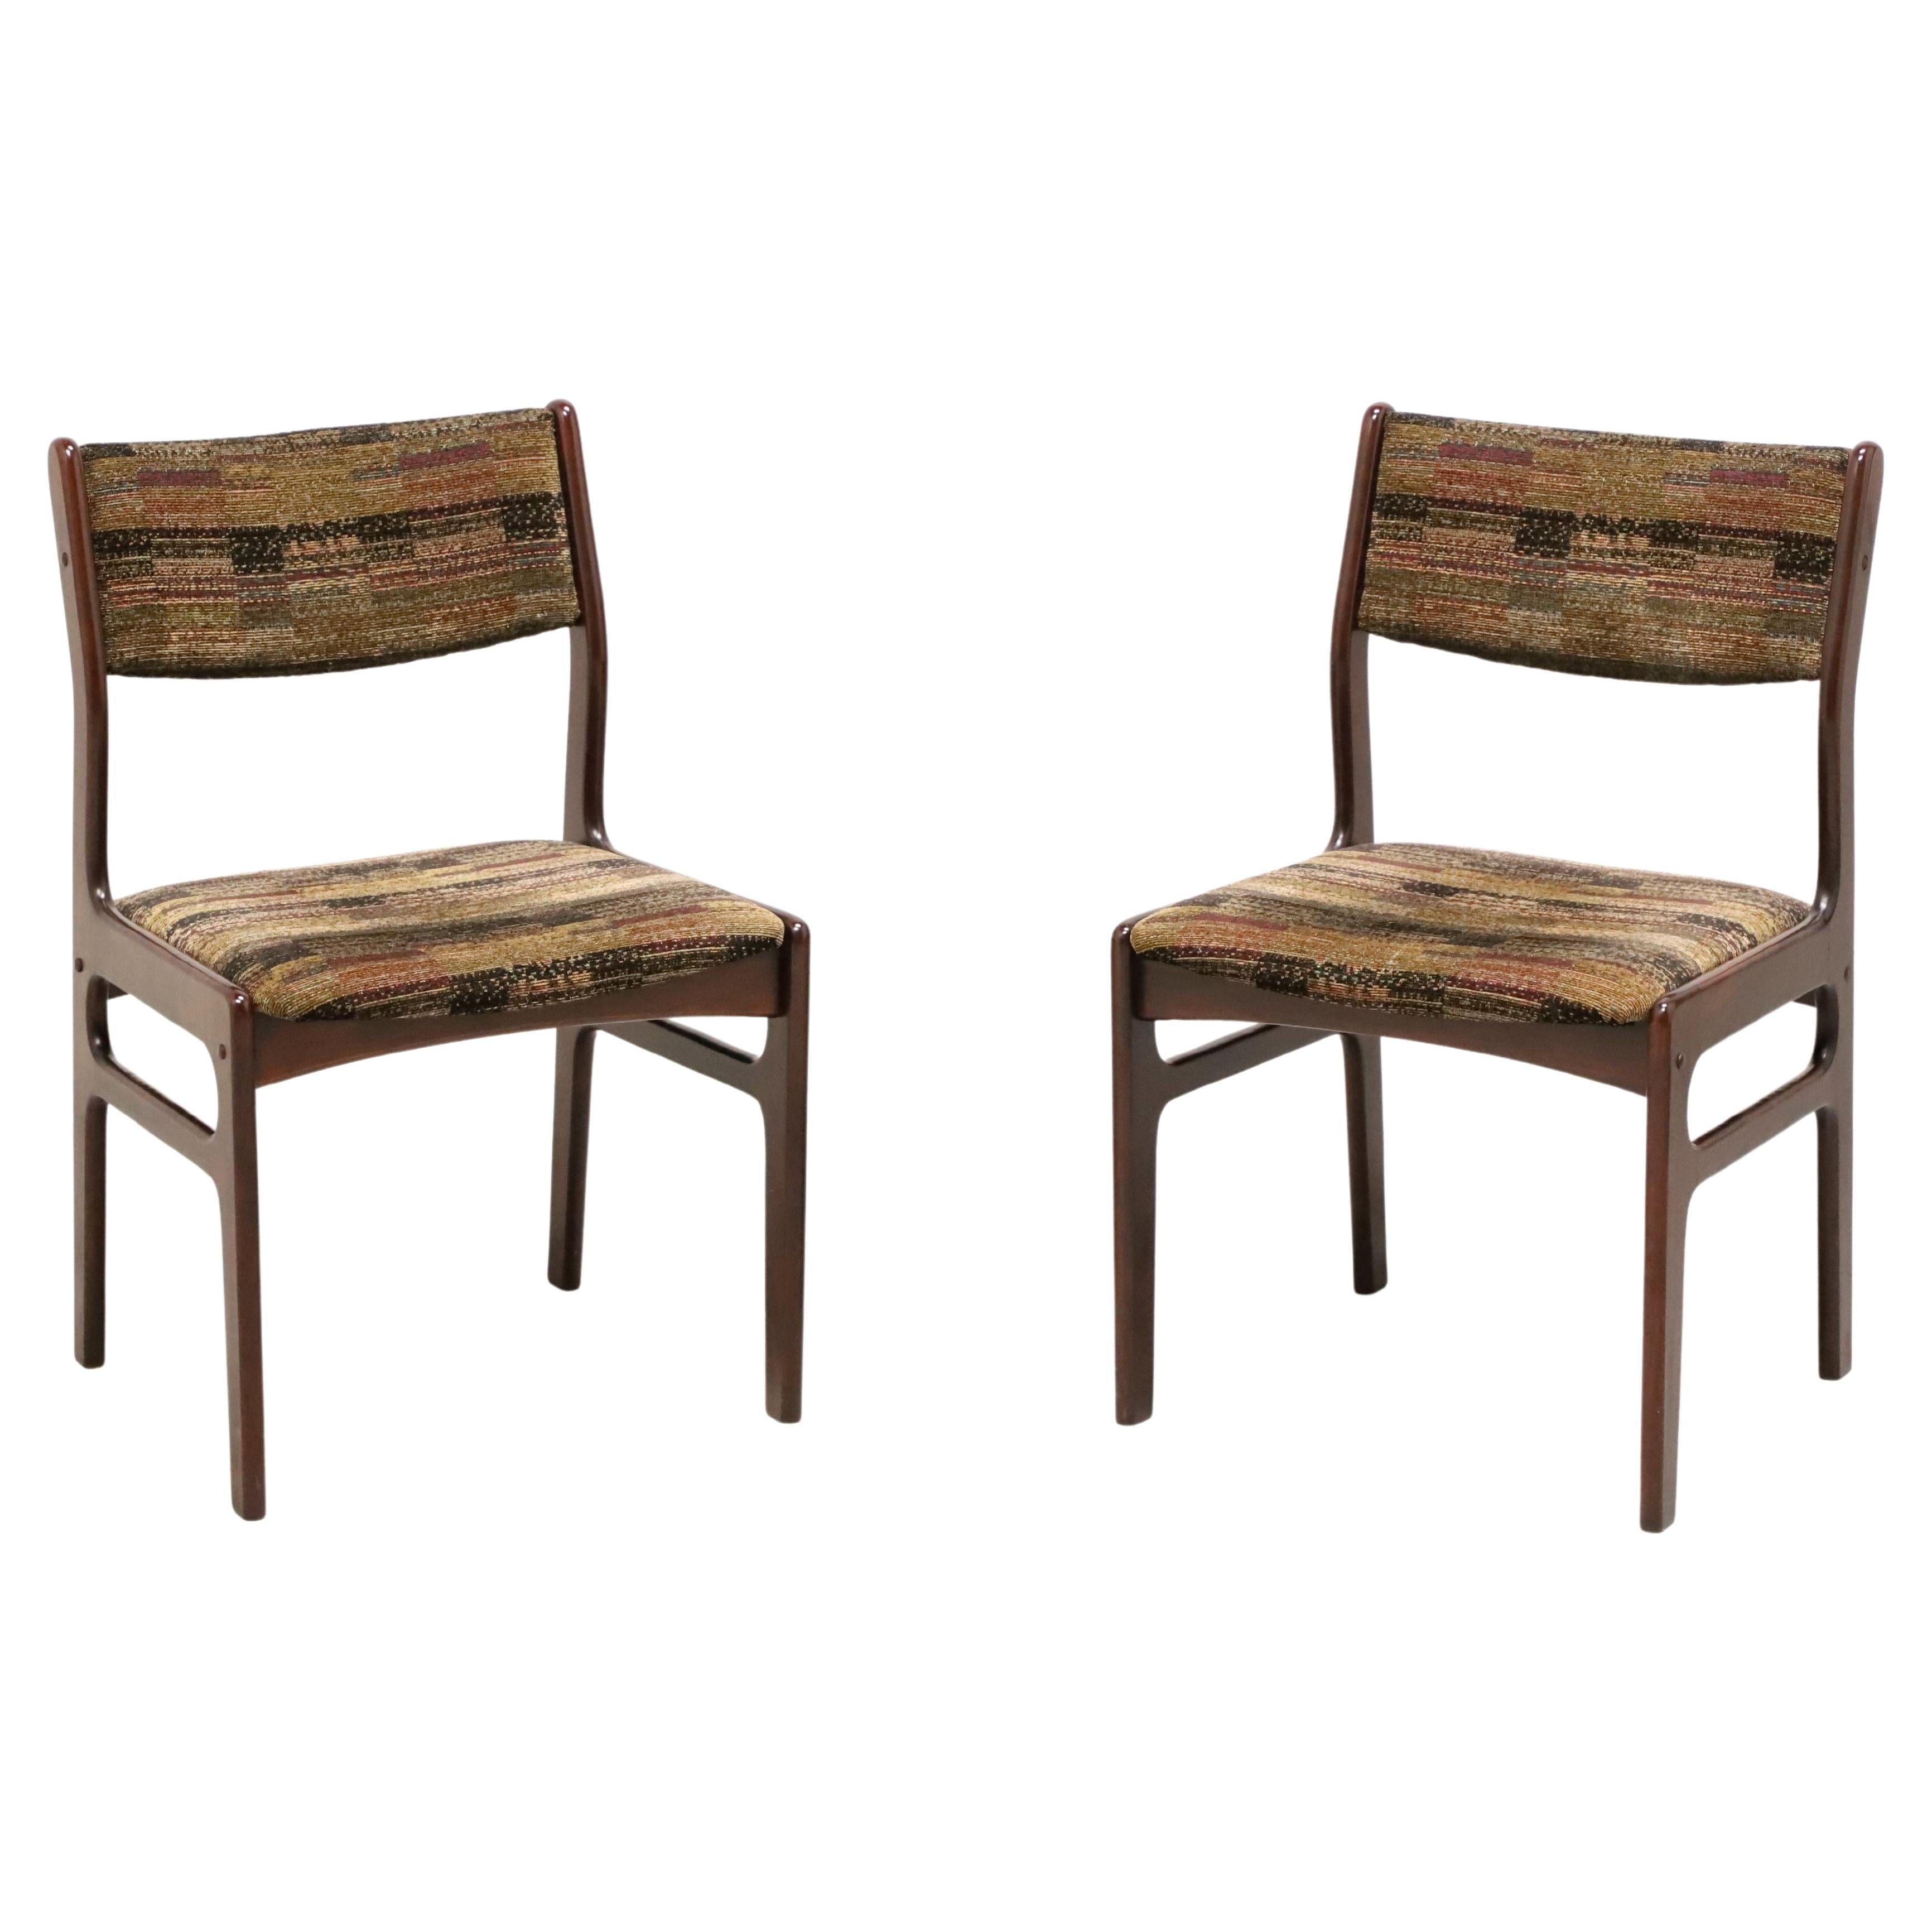 DYRLUND Mid 20th Century Rosewood Danish Modern Dining Side Chairs - Pair C For Sale